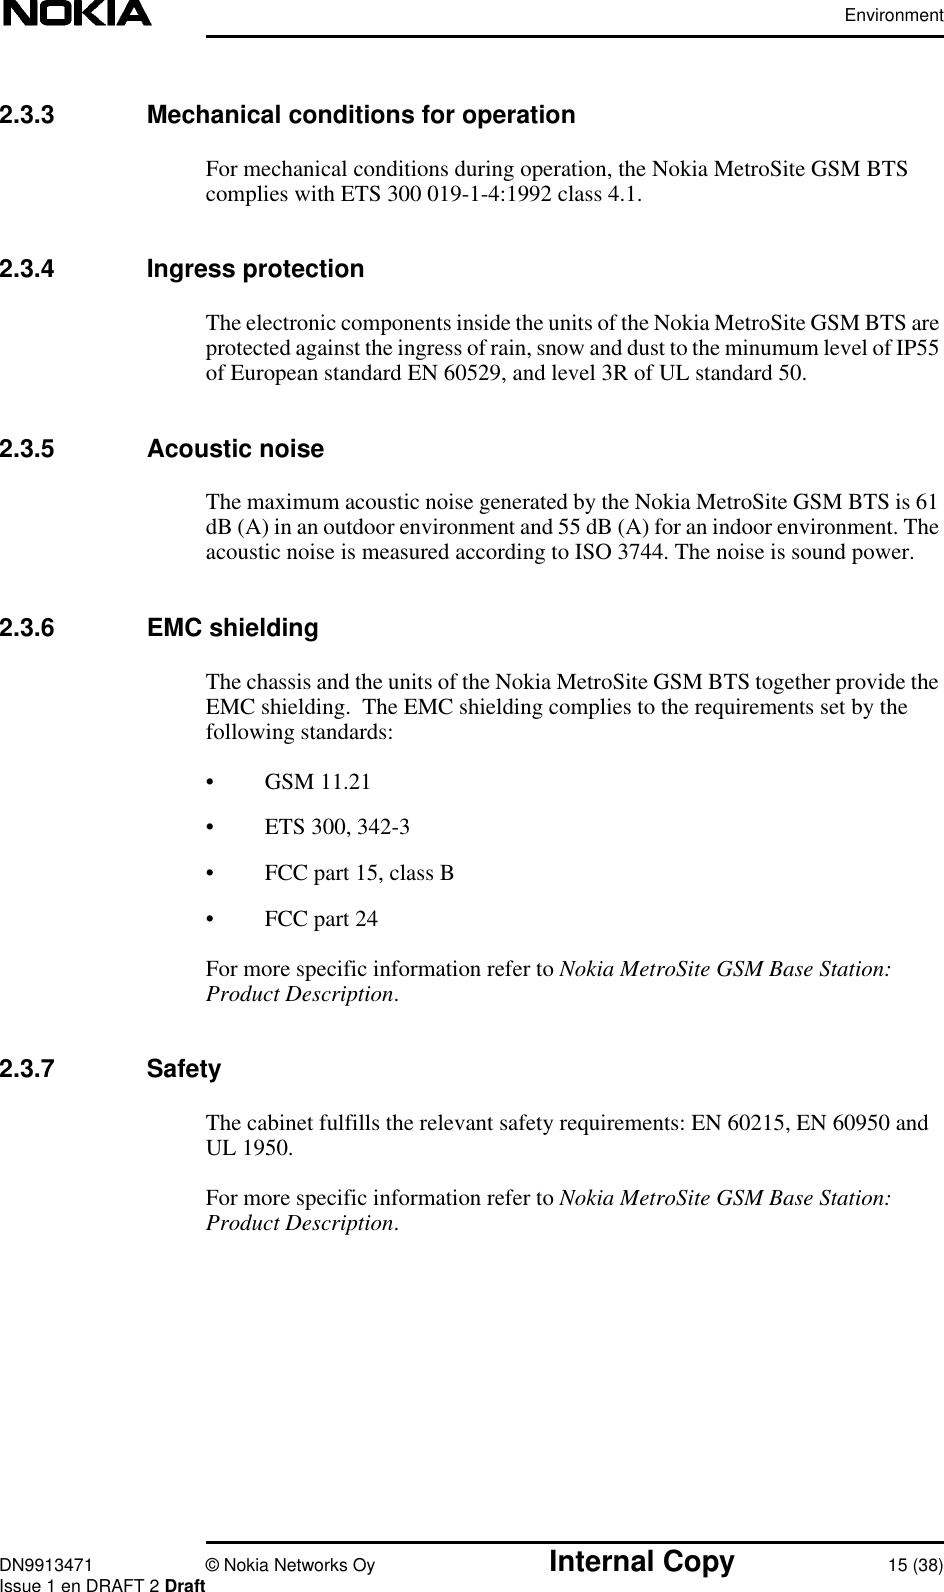 EnvironmentDN9913471 © Nokia Networks Oy Internal Copy 15 (38)Issue 1 en DRAFT 2 Draft2.3.3 Mechanical conditions for operationFor mechanical conditions during operation, the Nokia MetroSite GSM BTScomplies with ETS 300 019-1-4:1992 class 4.1.2.3.4 Ingress protectionThe electronic components inside the units of the Nokia MetroSite GSM BTS areprotected against the ingress of rain, snow and dust to the minumum level of IP55of European standard EN 60529, and level 3R of UL standard 50.2.3.5 Acoustic noiseThe maximum acoustic noise generated by the Nokia MetroSite GSM BTS is 61dB (A) in an outdoor environment and 55 dB (A) for an indoor environment. Theacoustic noise is measured according to ISO 3744. The noise is sound power.2.3.6 EMC shieldingThe chassis and the units of the Nokia MetroSite GSM BTS together provide theEMC shielding.  The EMC shielding complies to the requirements set by thefollowing standards:• GSM 11.21• ETS 300, 342-3• FCC part 15, class B• FCC part 24For more specific information refer to Nokia MetroSite GSM Base Station:Product Description.2.3.7 SafetyThe cabinet fulfills the relevant safety requirements: EN 60215, EN 60950 andUL 1950.For more specific information refer to Nokia MetroSite GSM Base Station:Product Description.